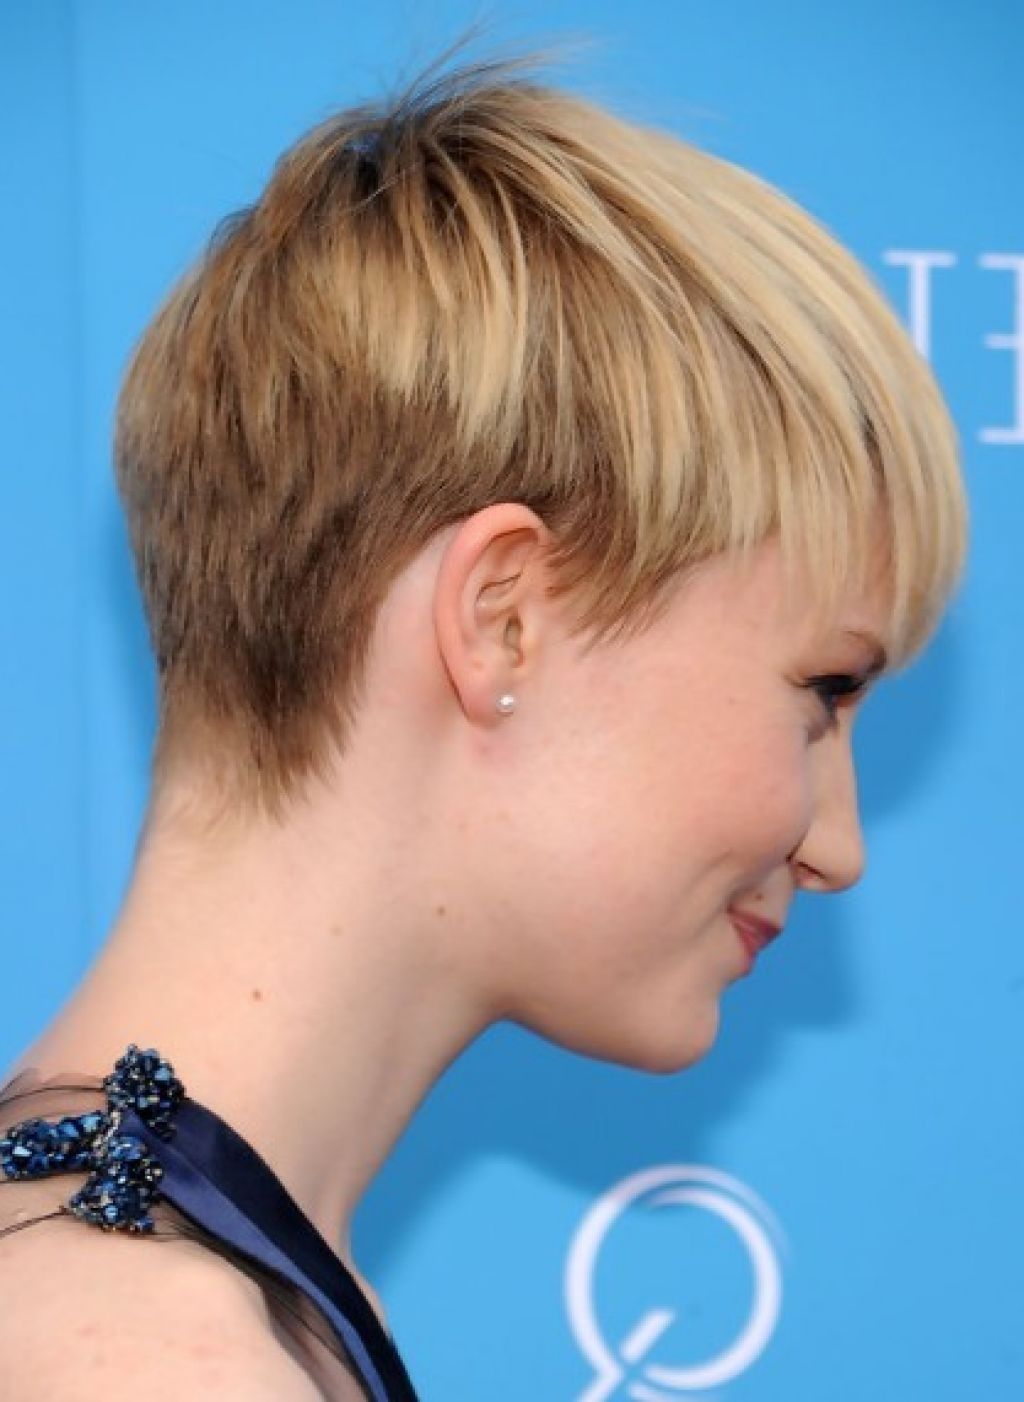 Back View Of Short Pixie Haircut 1000+ Images About Hair Styles On Inside Most Current Short Spiky Pixie Hairstyles (View 12 of 15)